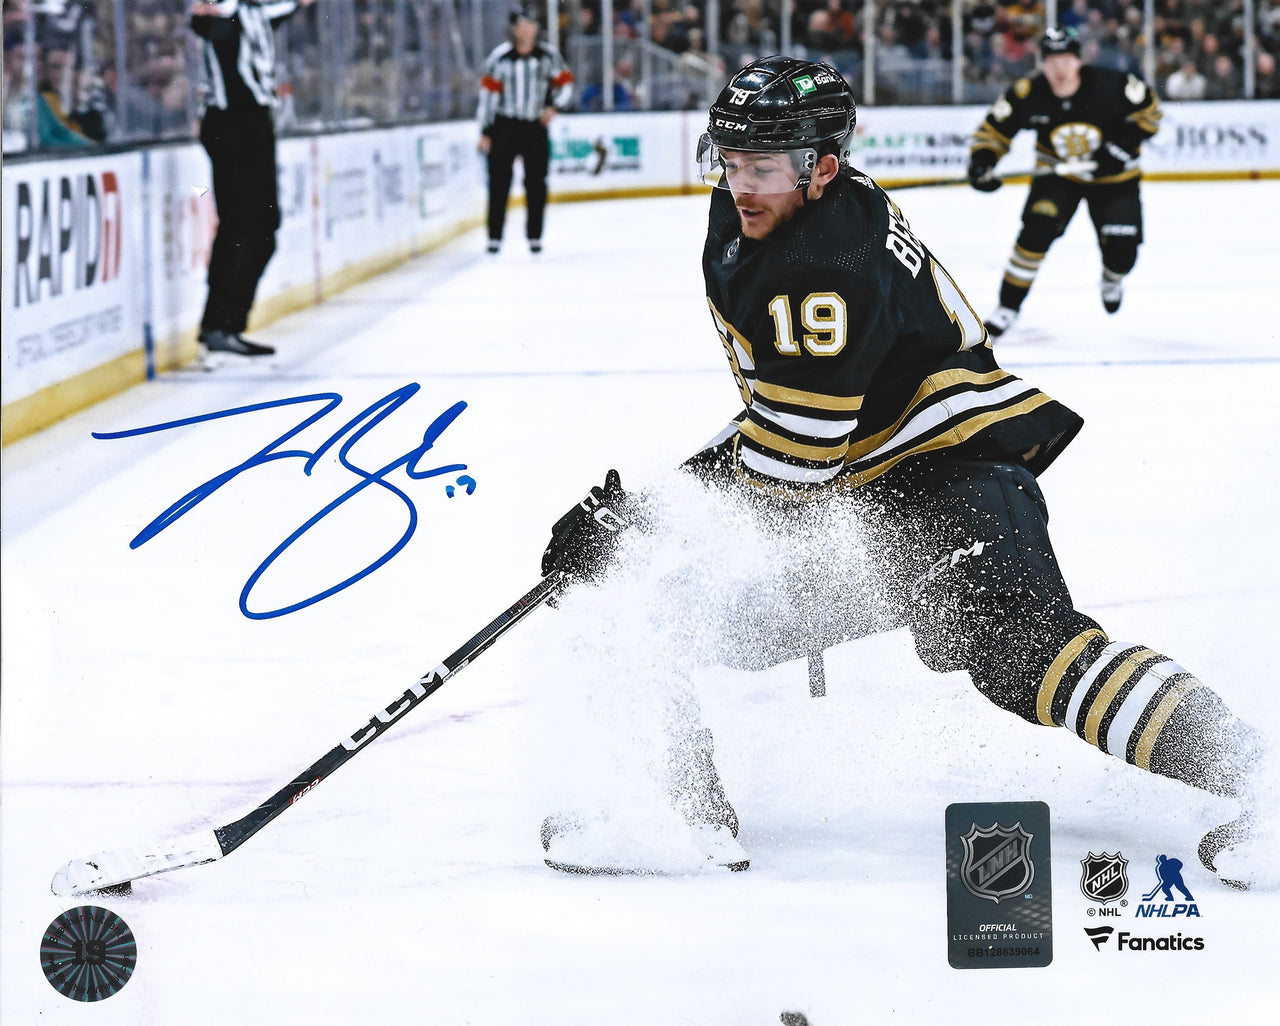 Johnny Beecher in Action Boston Bruins Autographed 8" x 10" Hockey Photo